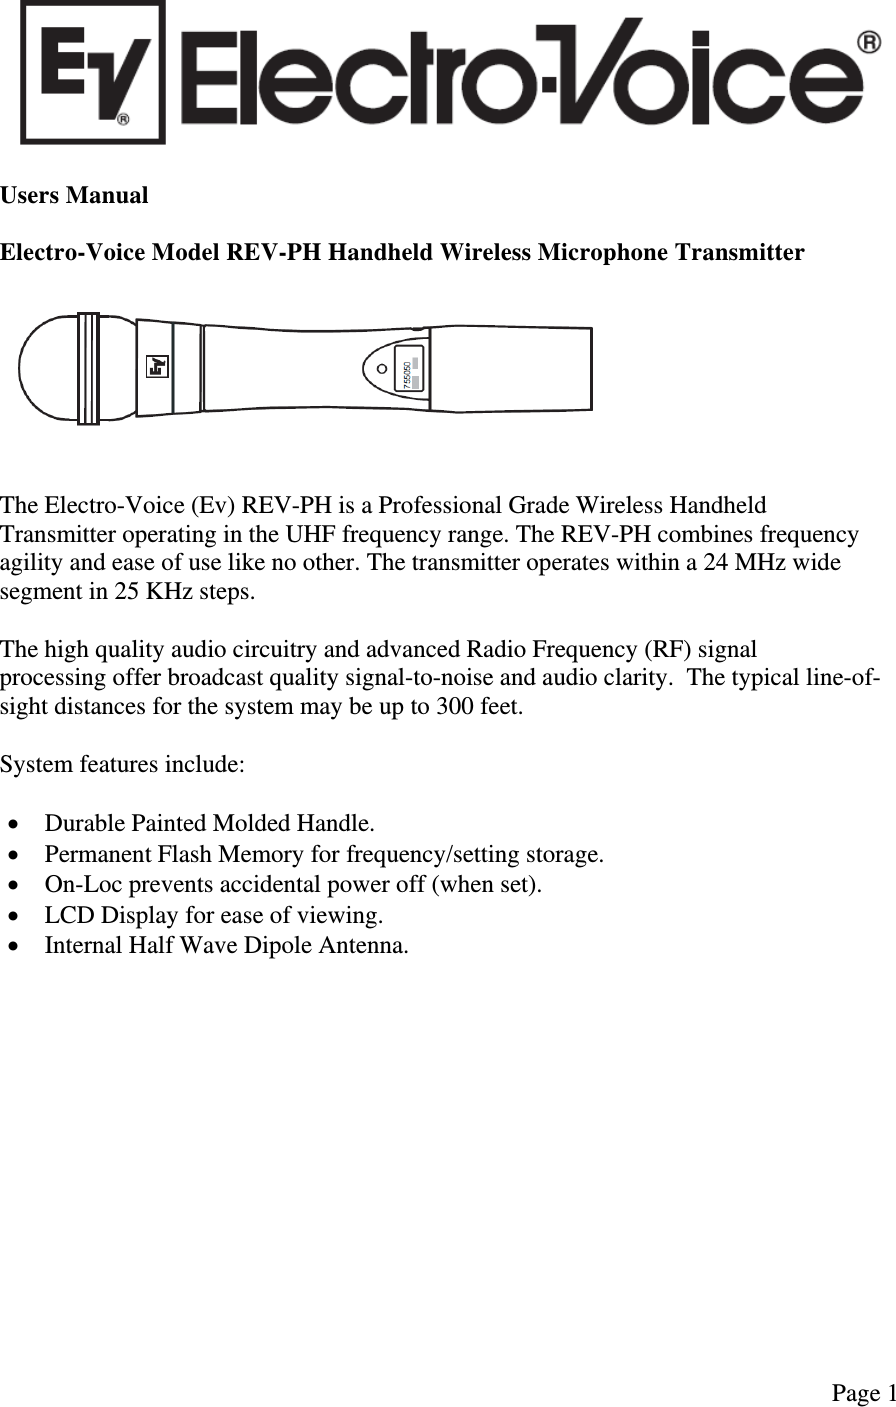   Page 1   Users Manual  Electro-Voice Model REV-PH Handheld Wireless Microphone Transmitter     The Electro-Voice (Ev) REV-PH is a Professional Grade Wireless Handheld Transmitter operating in the UHF frequency range. The REV-PH combines frequency agility and ease of use like no other. The transmitter operates within a 24 MHz wide segment in 25 KHz steps.  The high quality audio circuitry and advanced Radio Frequency (RF) signal processing offer broadcast quality signal-to-noise and audio clarity.  The typical line-of-sight distances for the system may be up to 300 feet.  System features include:   Durable Painted Molded Handle.  Permanent Flash Memory for frequency/setting storage.  On-Loc prevents accidental power off (when set).  LCD Display for ease of viewing.  Internal Half Wave Dipole Antenna.               